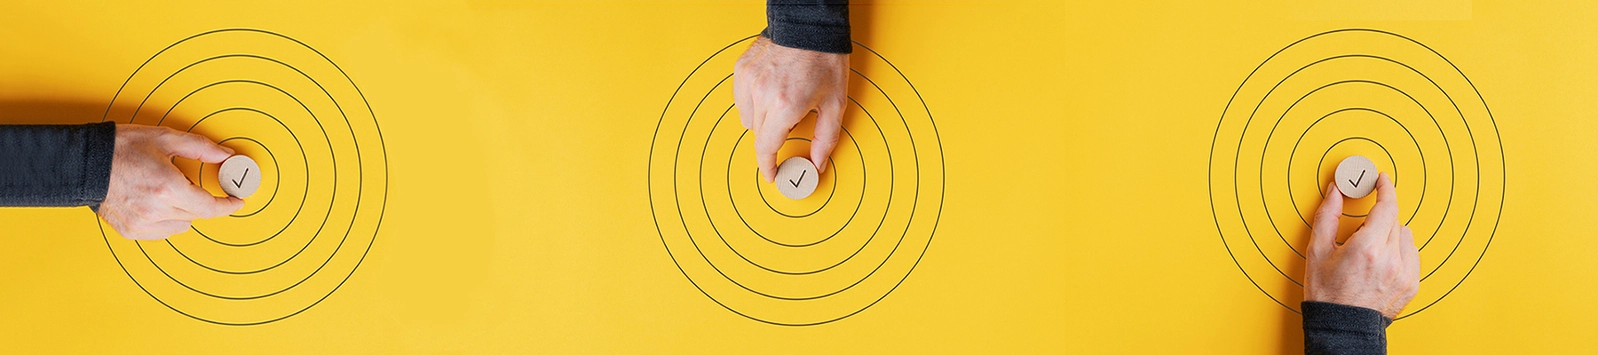 hand placing a wooden circle with checkmark in the middle of hand-drawn target